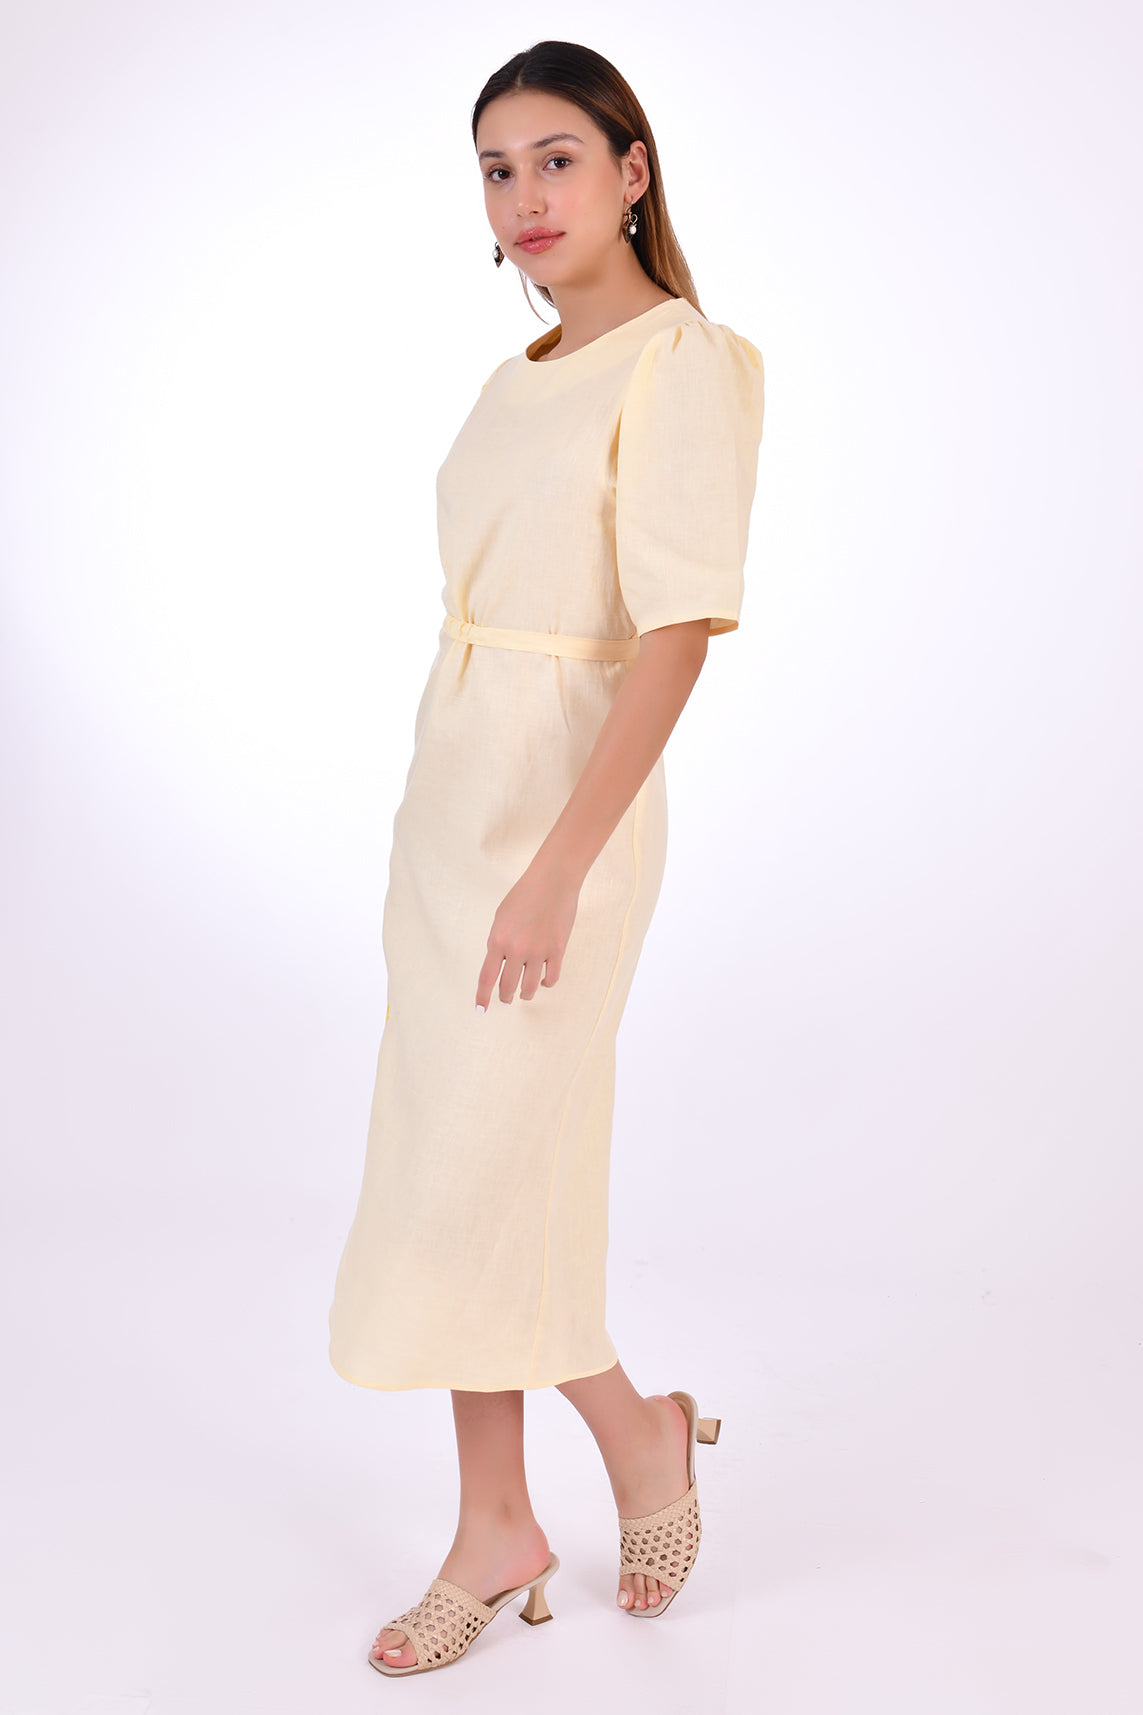 Fanm Mon Doga Midi Linen Dress, Side View Belted. Short Sleeve 100% Linen Dress, featuring a peephole open back and button closure. Round neck, with a belt for the waist (can be worn with or without), and features front embroidery detail.